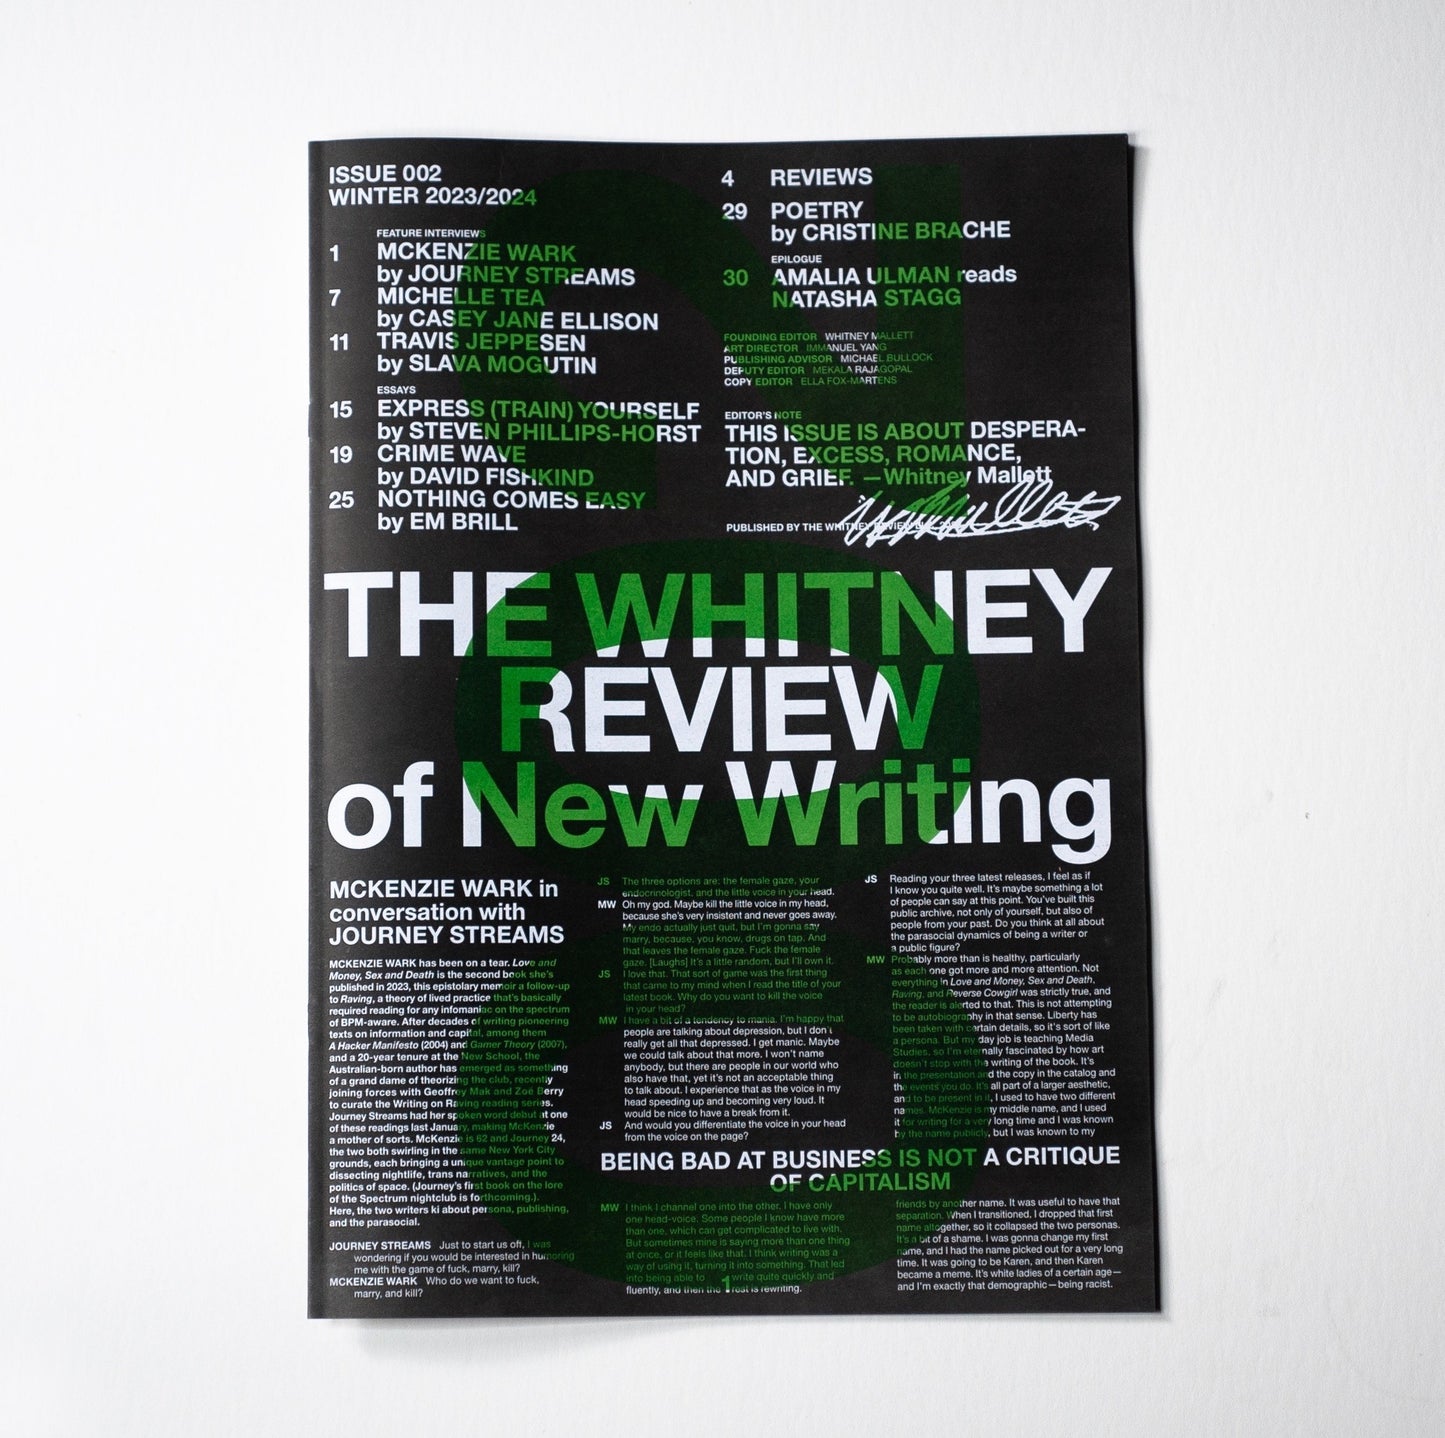 THE WHITNEY REVIEW Of New Writing Issue 002 Winter 2023/2024